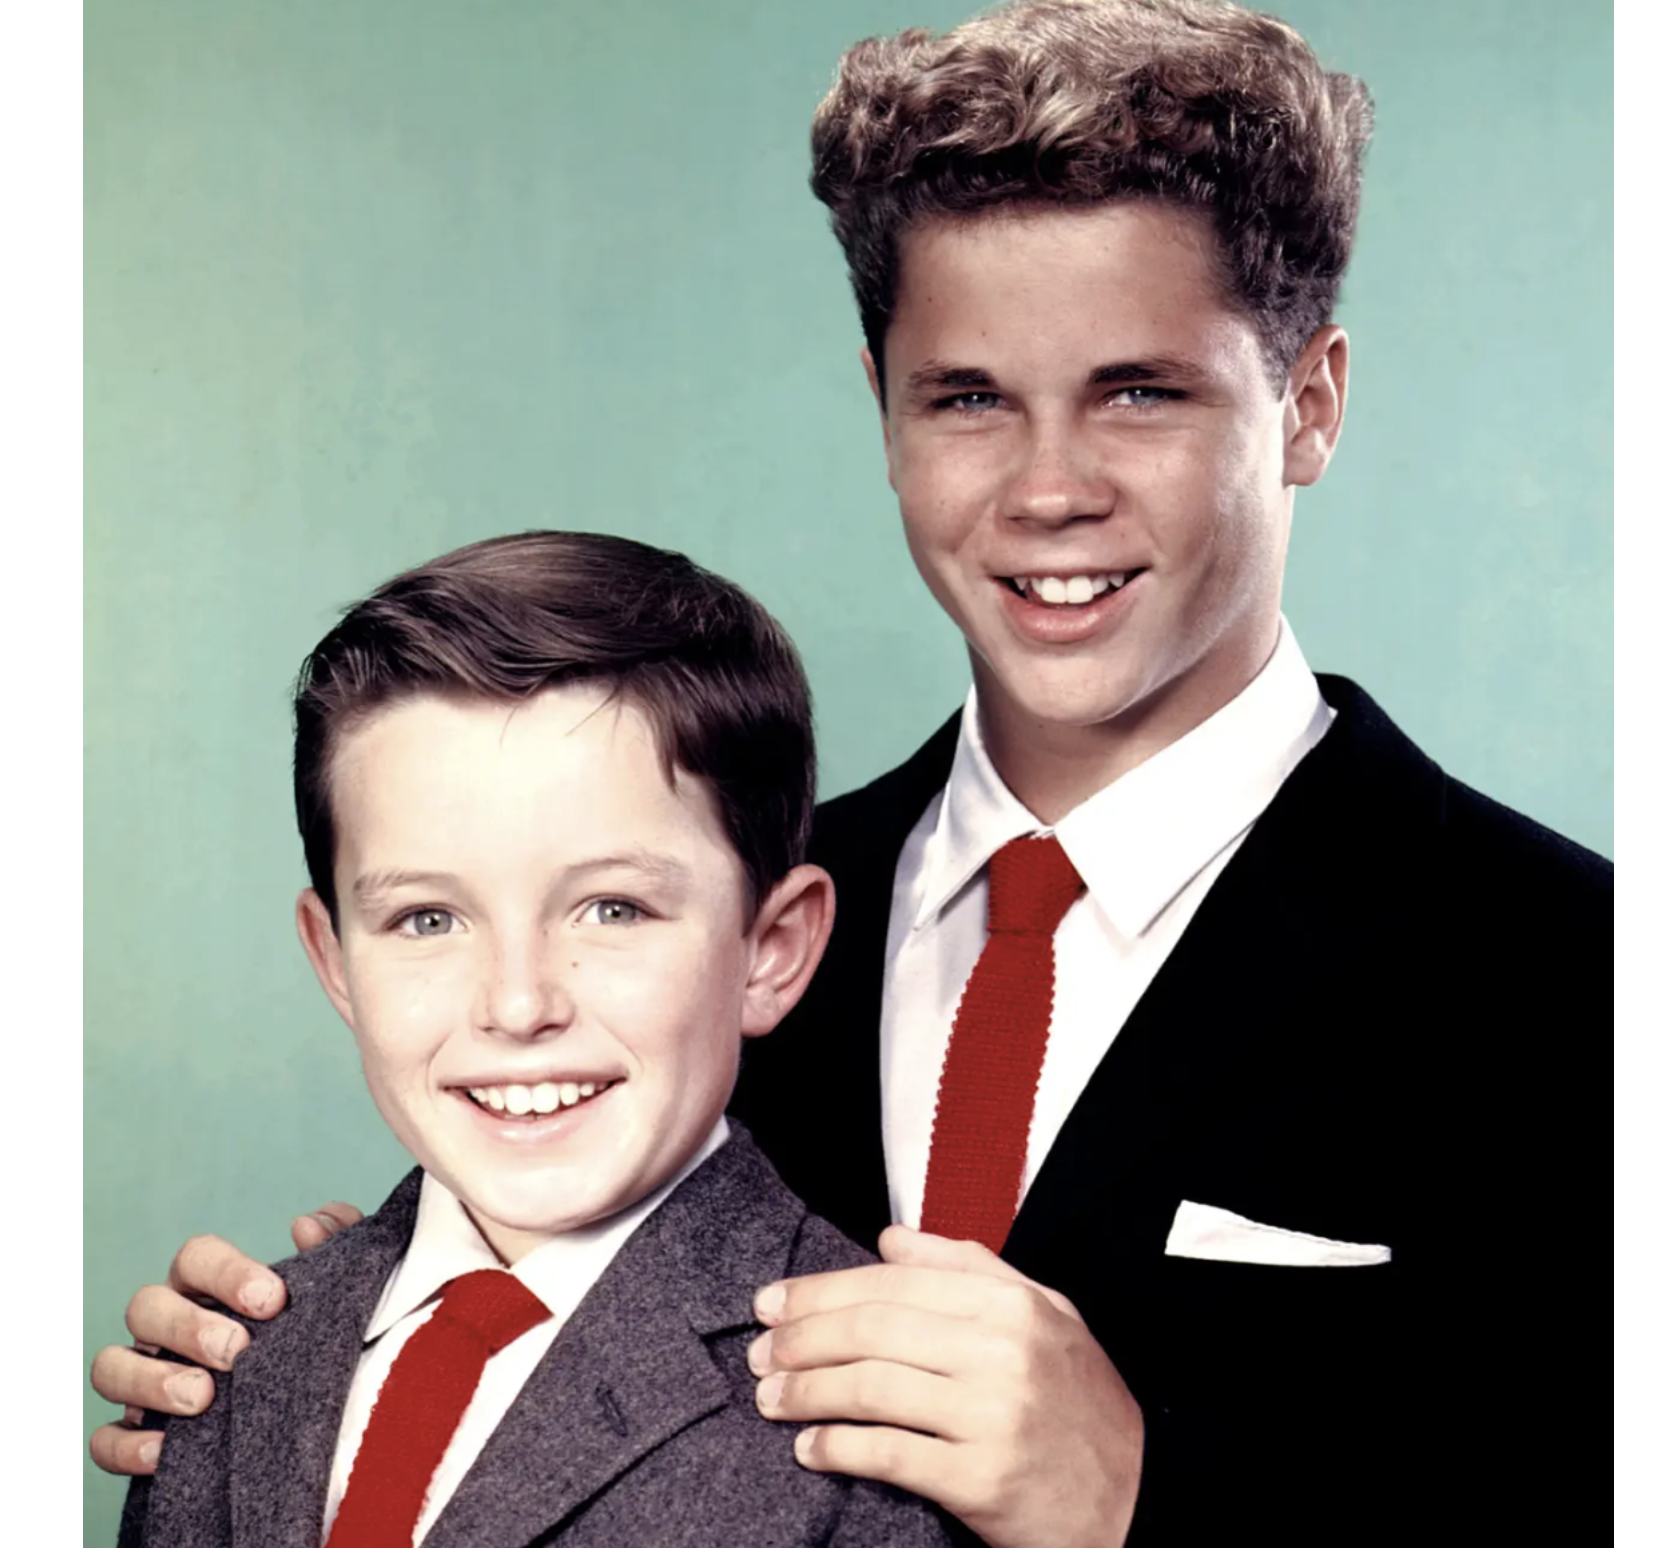 Jerry Mathers and Tony Dow co-starred in the iconic “Leave It to Beaver” from 1957 to 1963. Unlike many child stars, when his career stalled, Dow explored new walks of professional life: He took a break from show biz to serve in the National Guard from 1965 to 1968, and in the ’70s he attended journalism school while working in contracting and construction for luxury condominiums. Courtesy Everett Collection